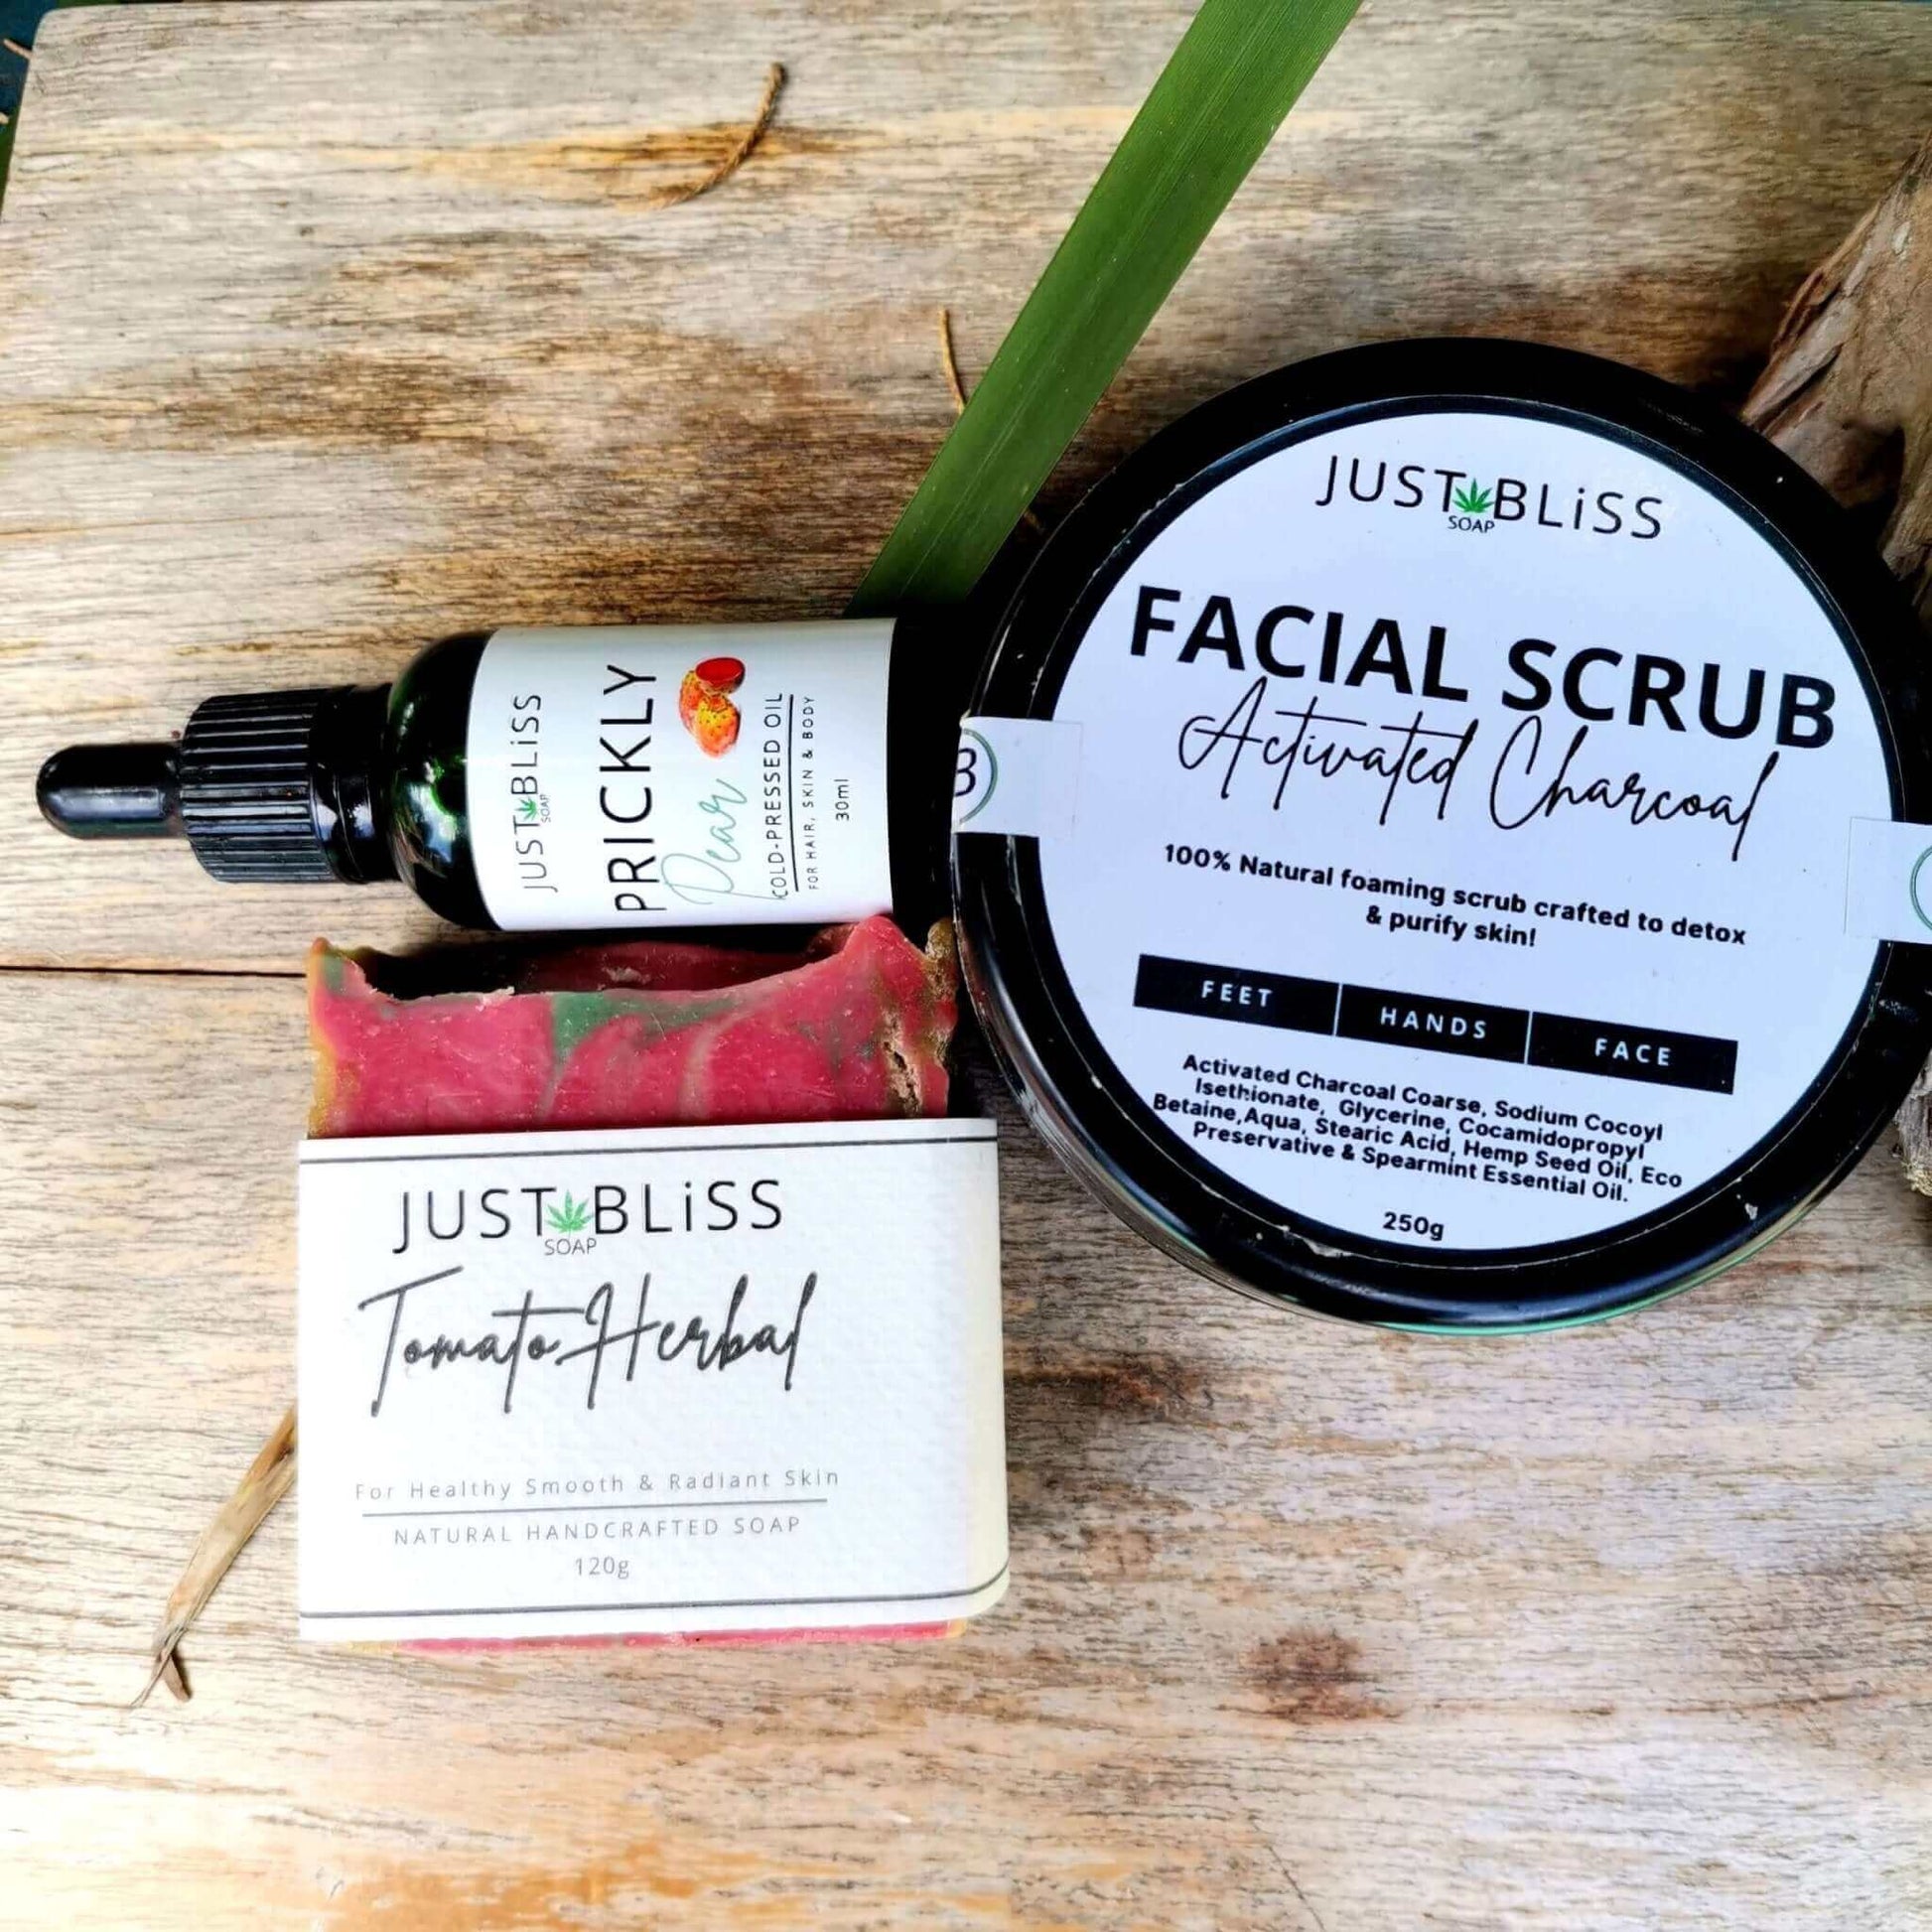 COMBO ACNE: Mature Skin (Hormonal) - JUSTBLiSS Soap